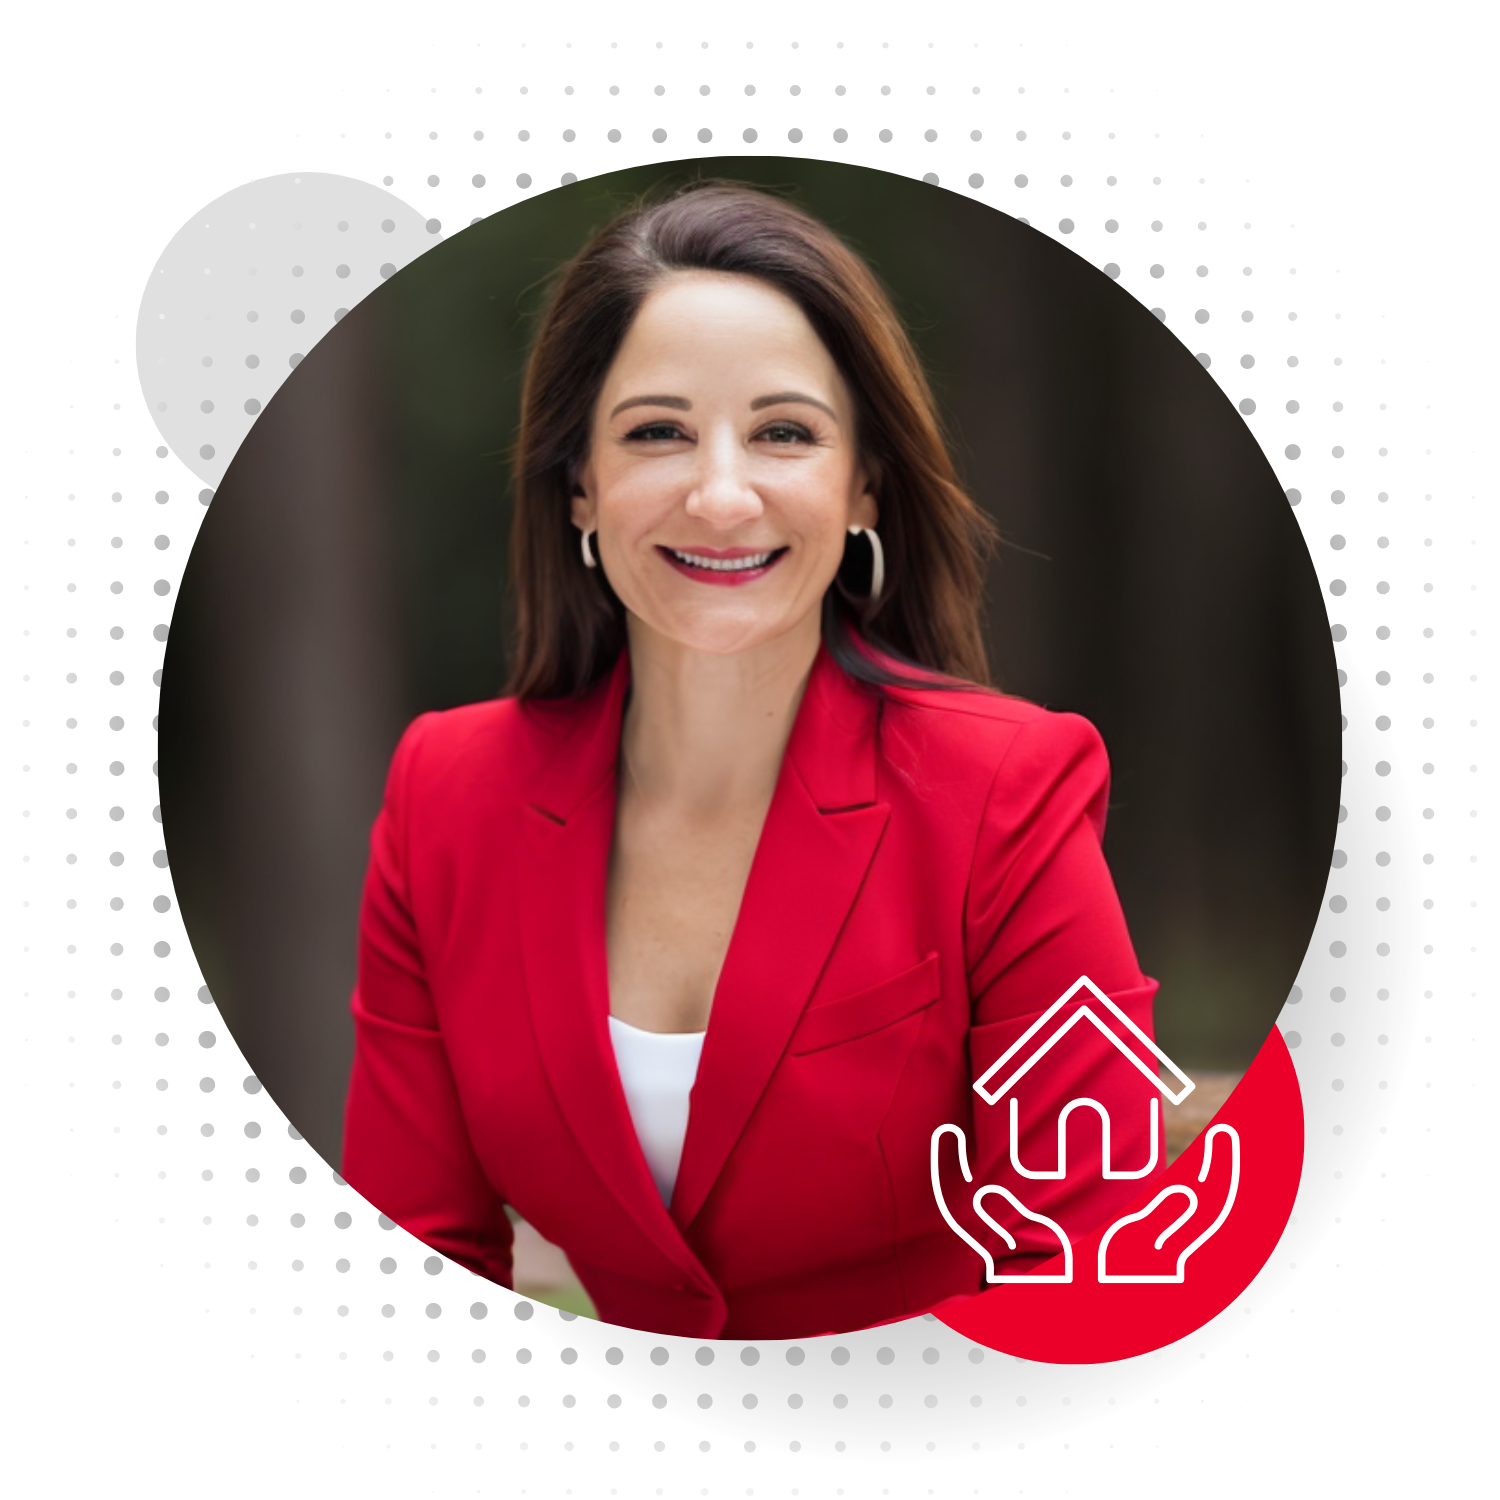 Picture of Pepine Realty and Pepine Gives founder and owner, Betsy Pepine, smiling. She is caucasian, brunette, and wearing a bright red suit with red lipstick.